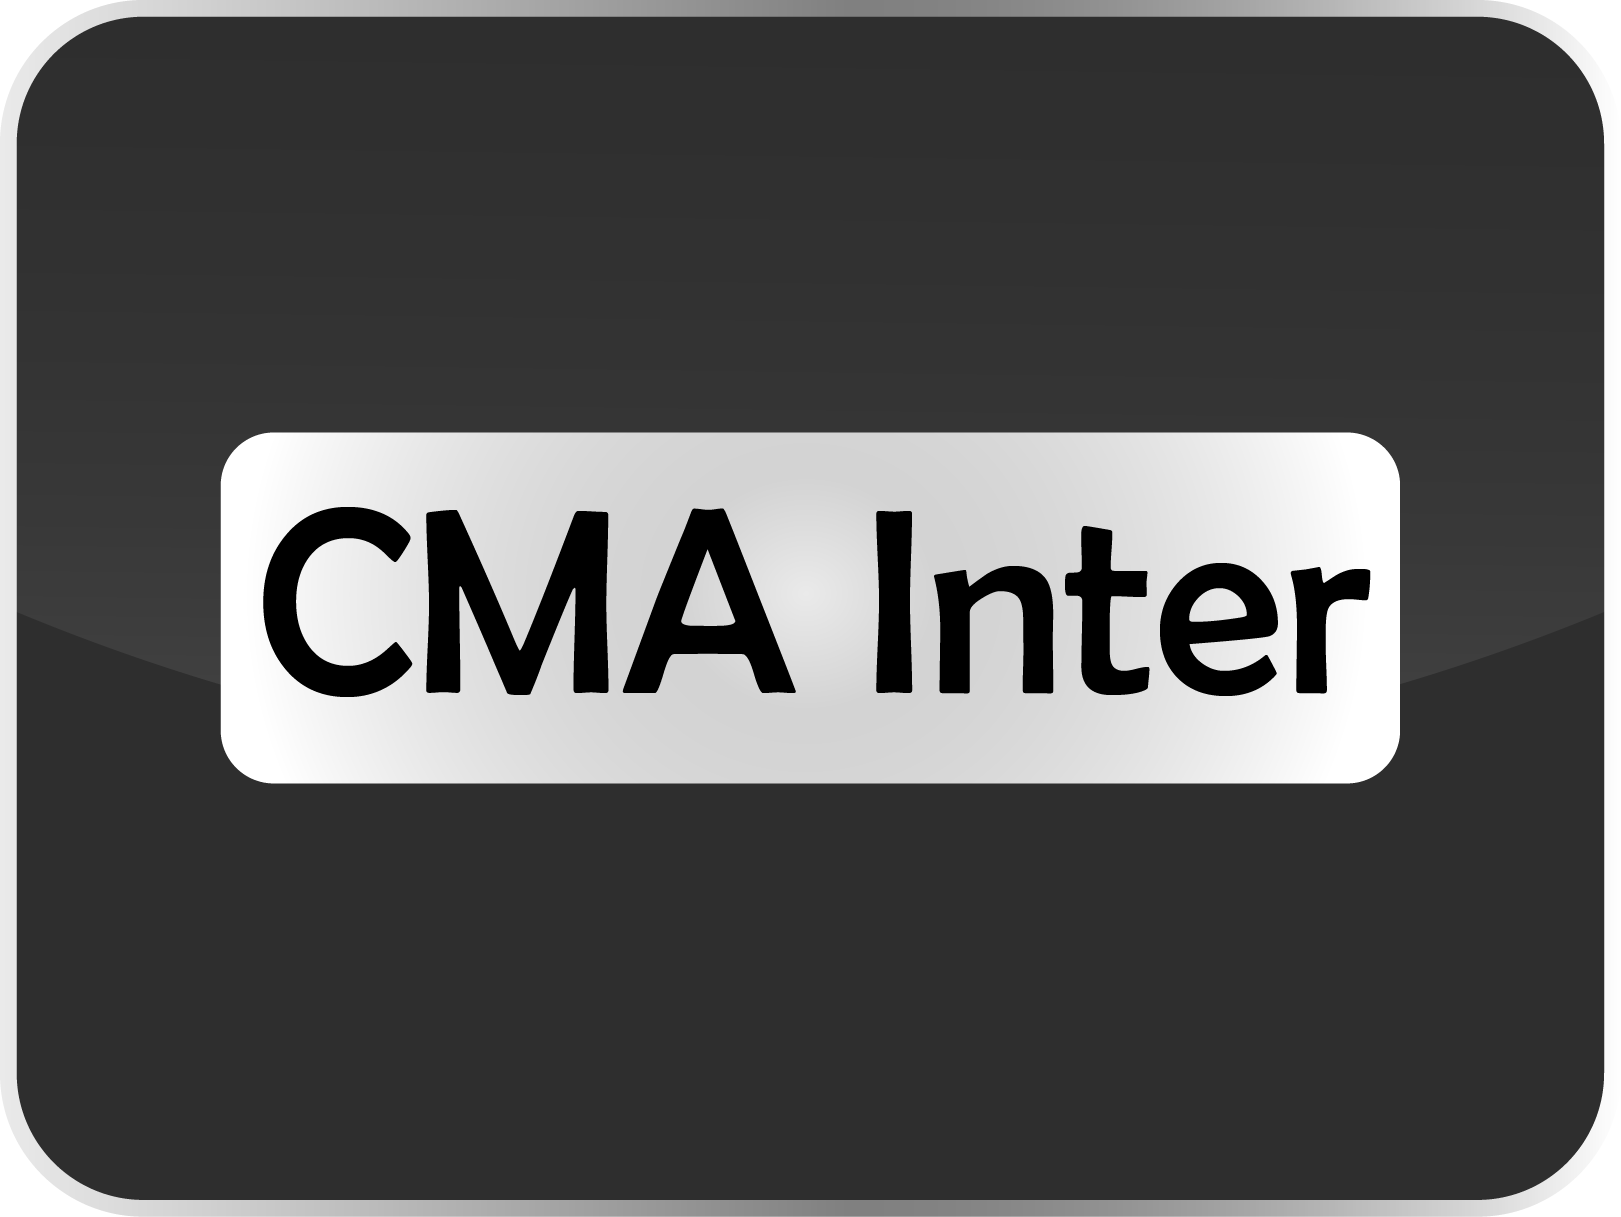 cma inter coursrs